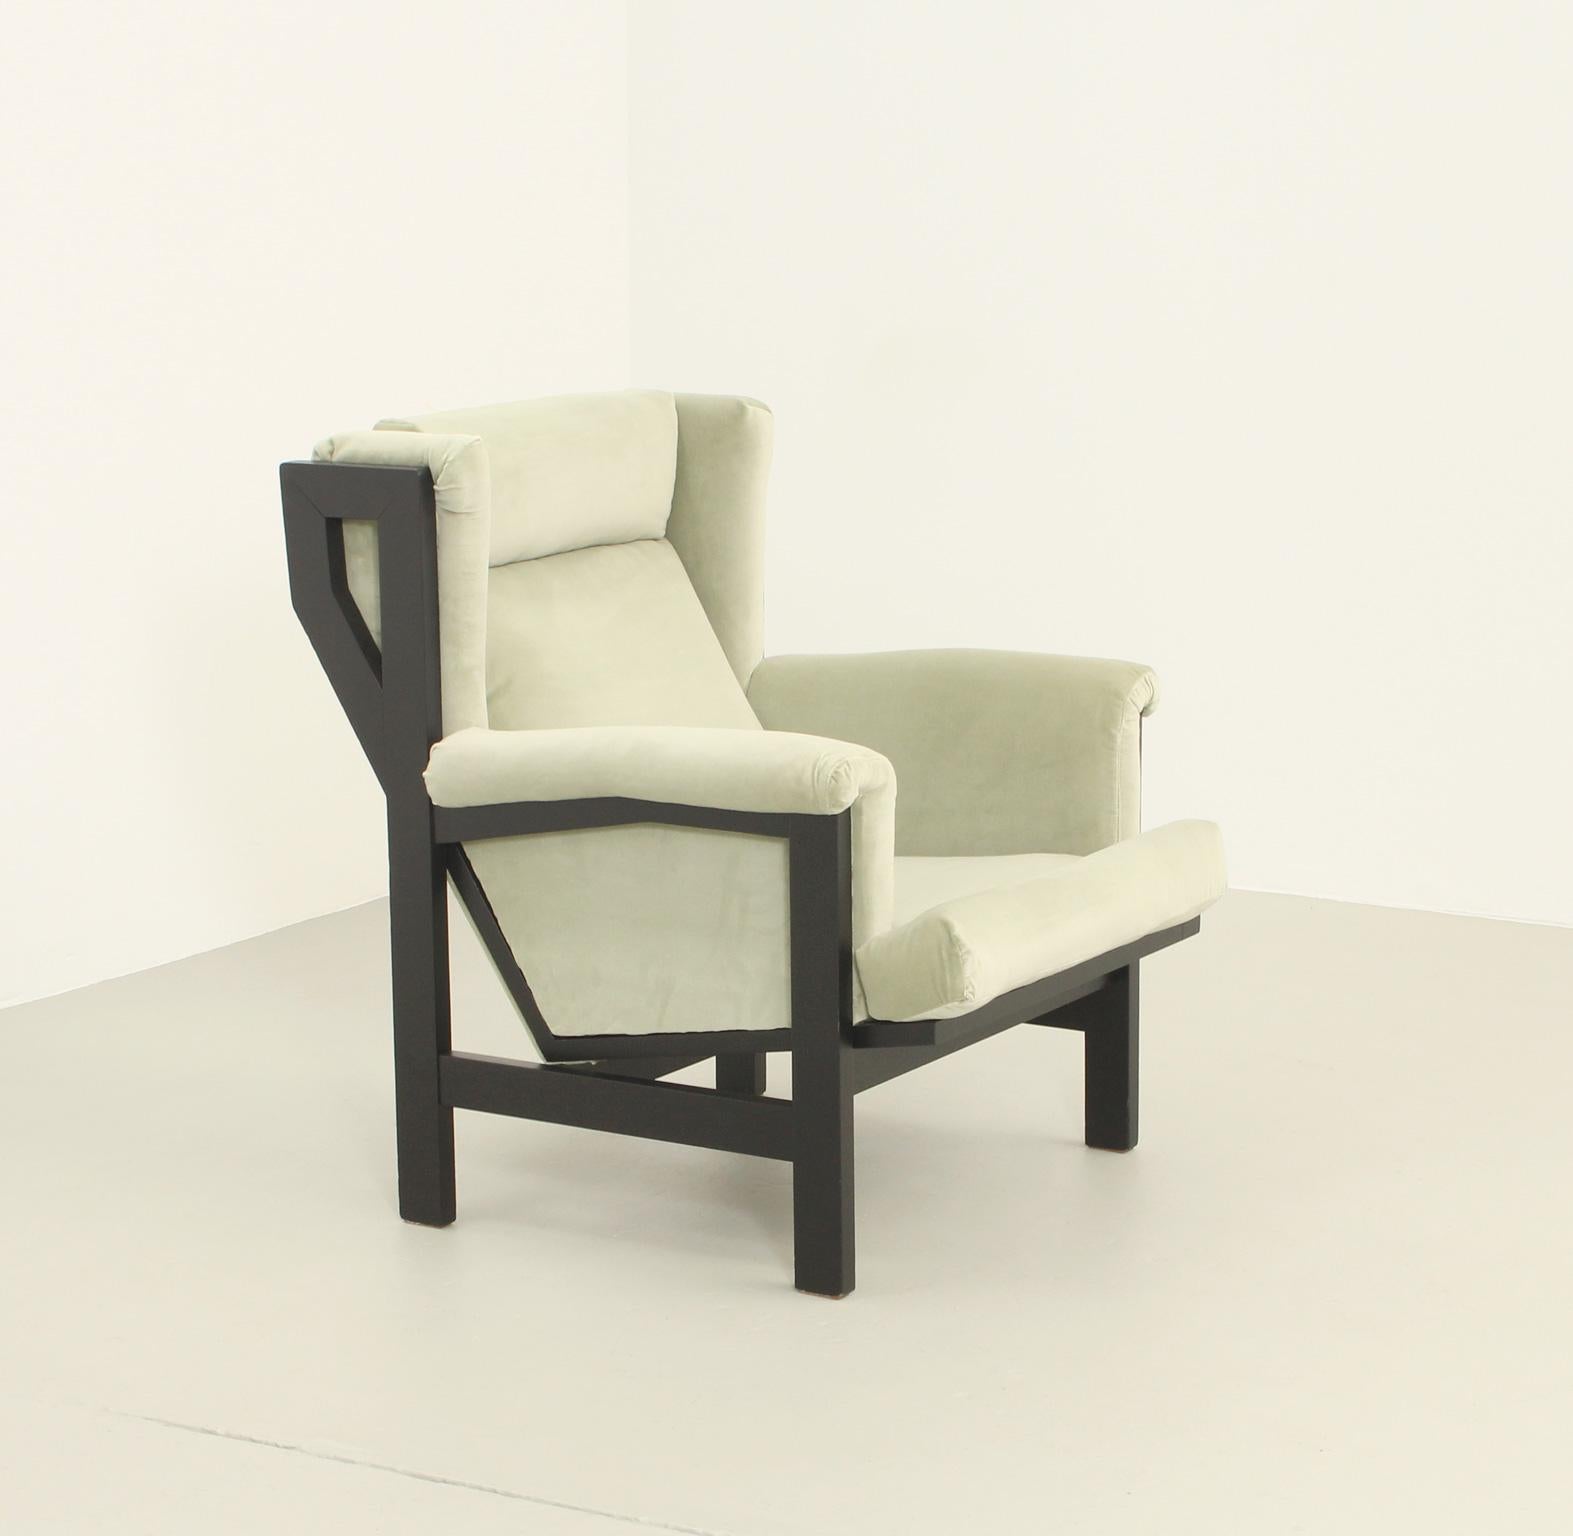 San Remo Armchair By Rafael Carreras, Spain, 1959 For Sale 1